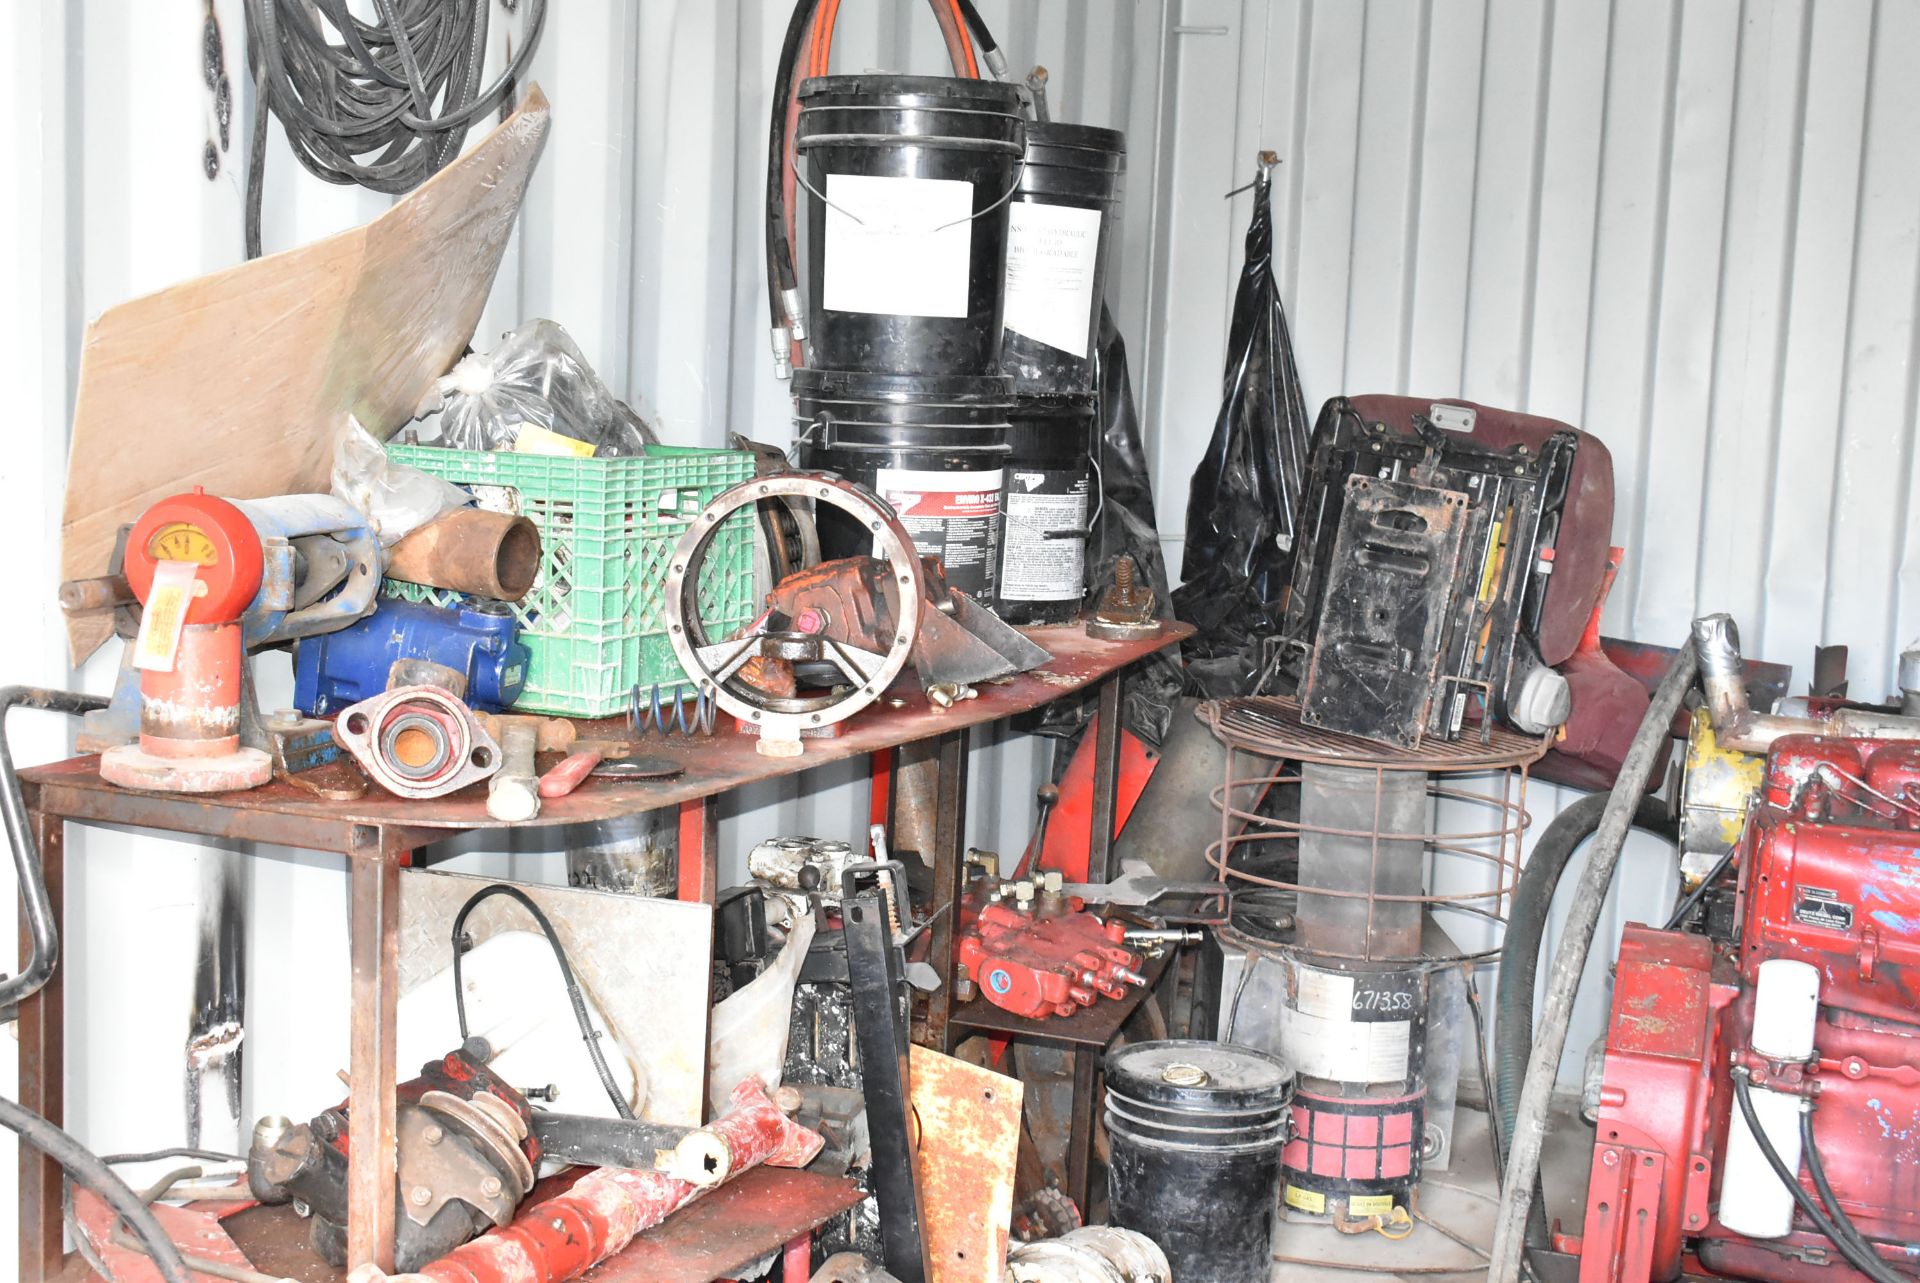 LOT/ CONTENTS OF CONTAINER CONSISTING OF DIESEL ENGINES, HYDRAULIC PARTS, HOSE & COMPONENTS - Image 2 of 3